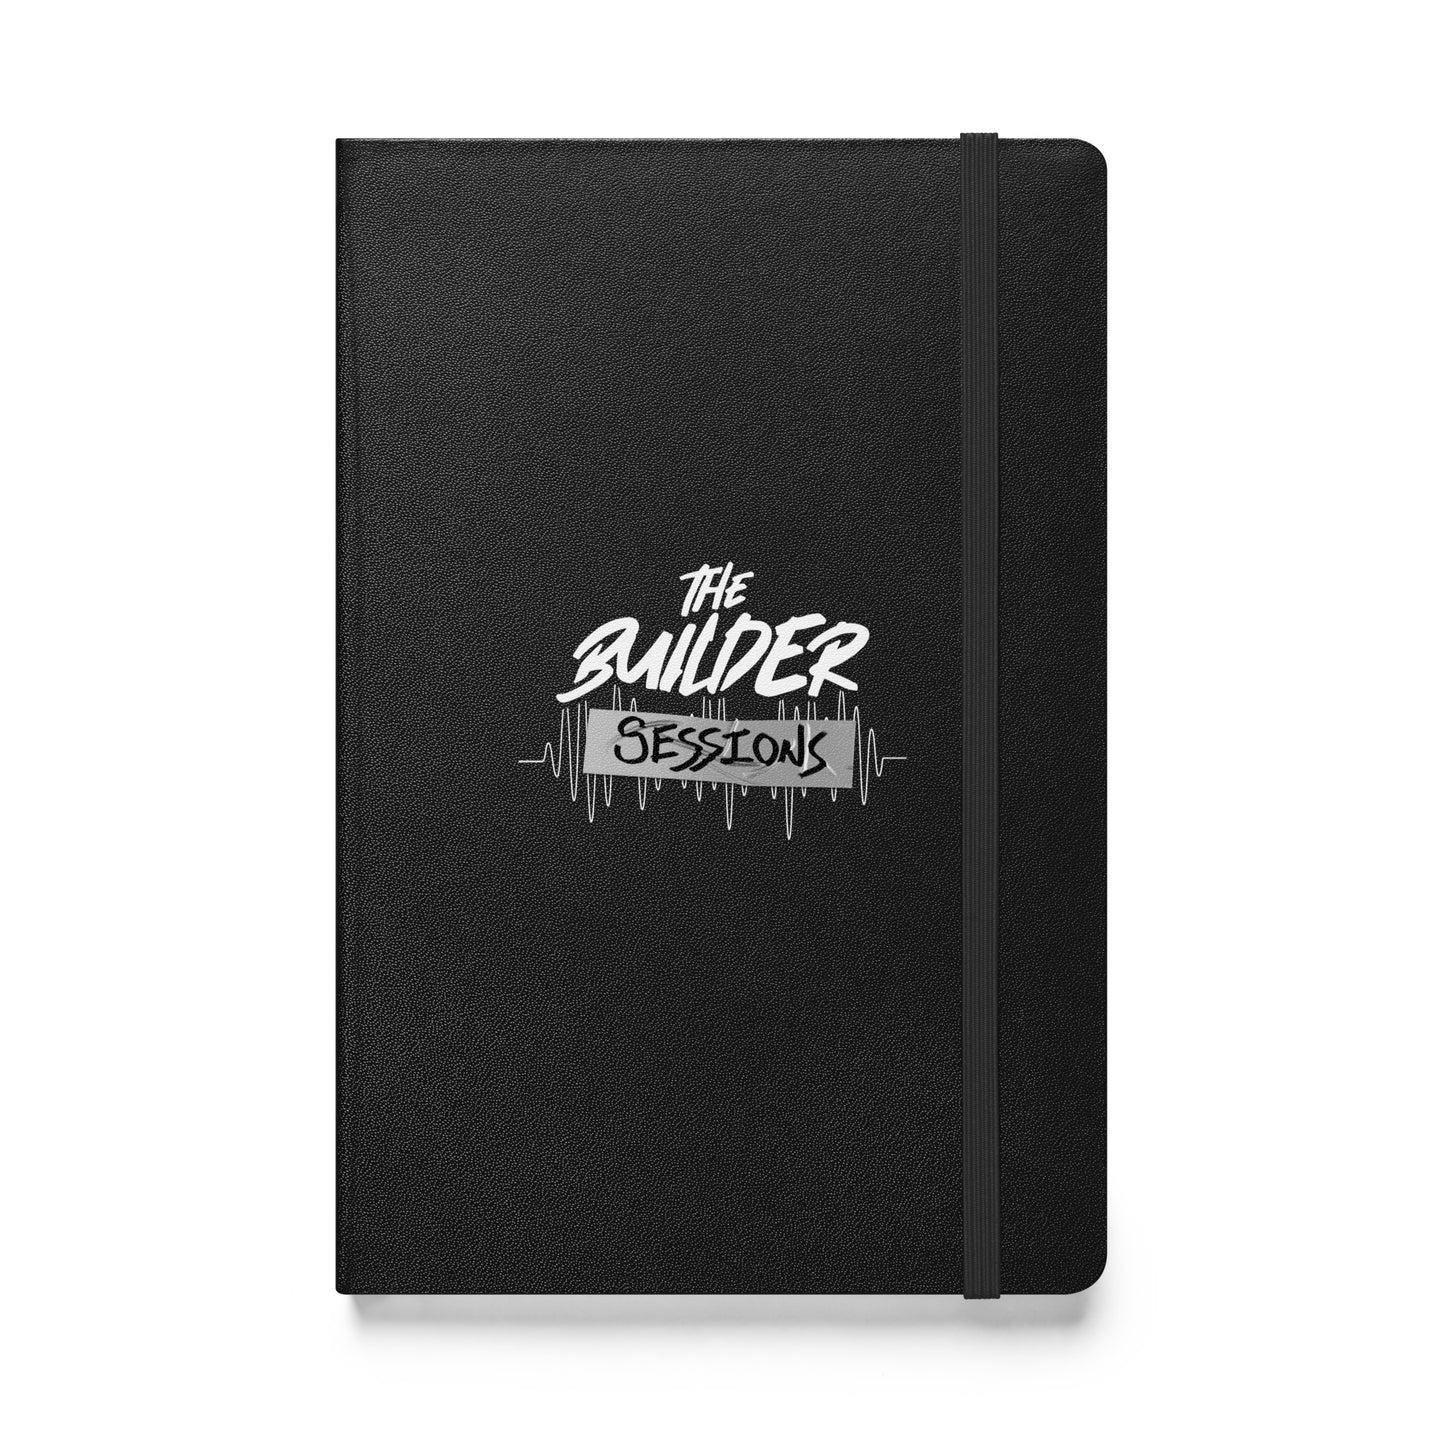 The Builder Sessions Hardcover bound notebook